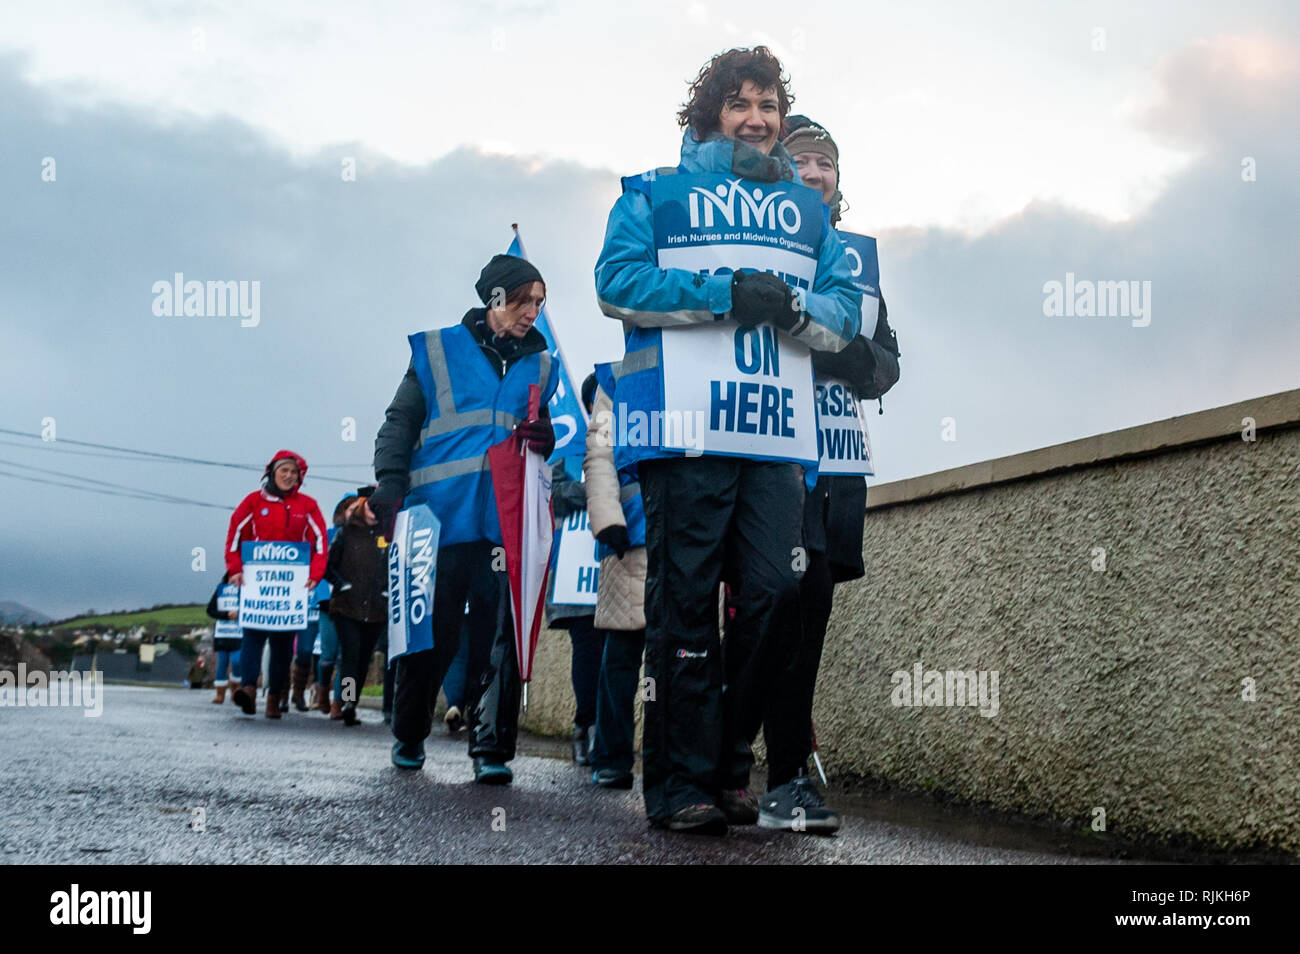 Bantry, West Cork, Ireland. 7th Feb, 2019. Striking nurses from Bantry General Hospital picket the hospital entrance for a third day after the Government refused to engage with the INMO over the pay and staff recruitment and retention issues. Credit: AG News/Alamy Live News. Stock Photo